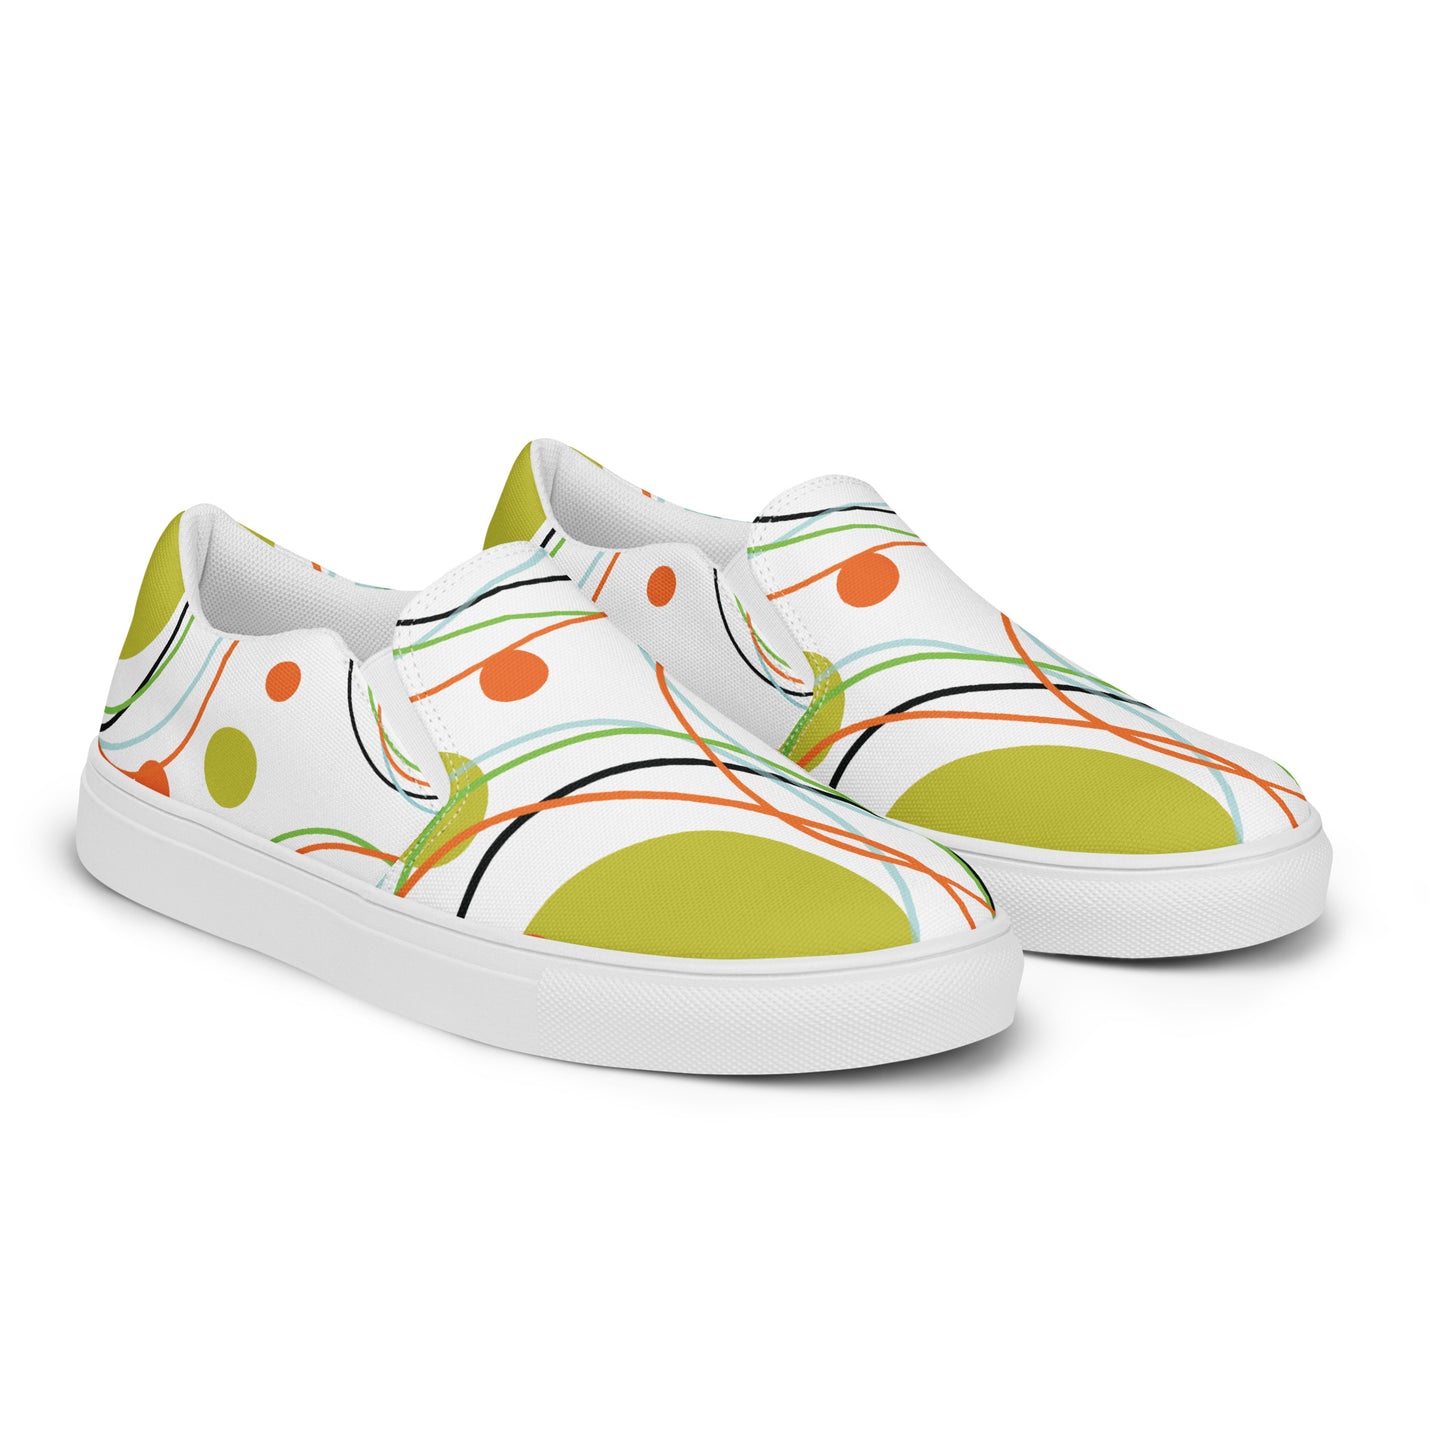 Orbit - Sustainably Made Women’s slip-on canvas shoes